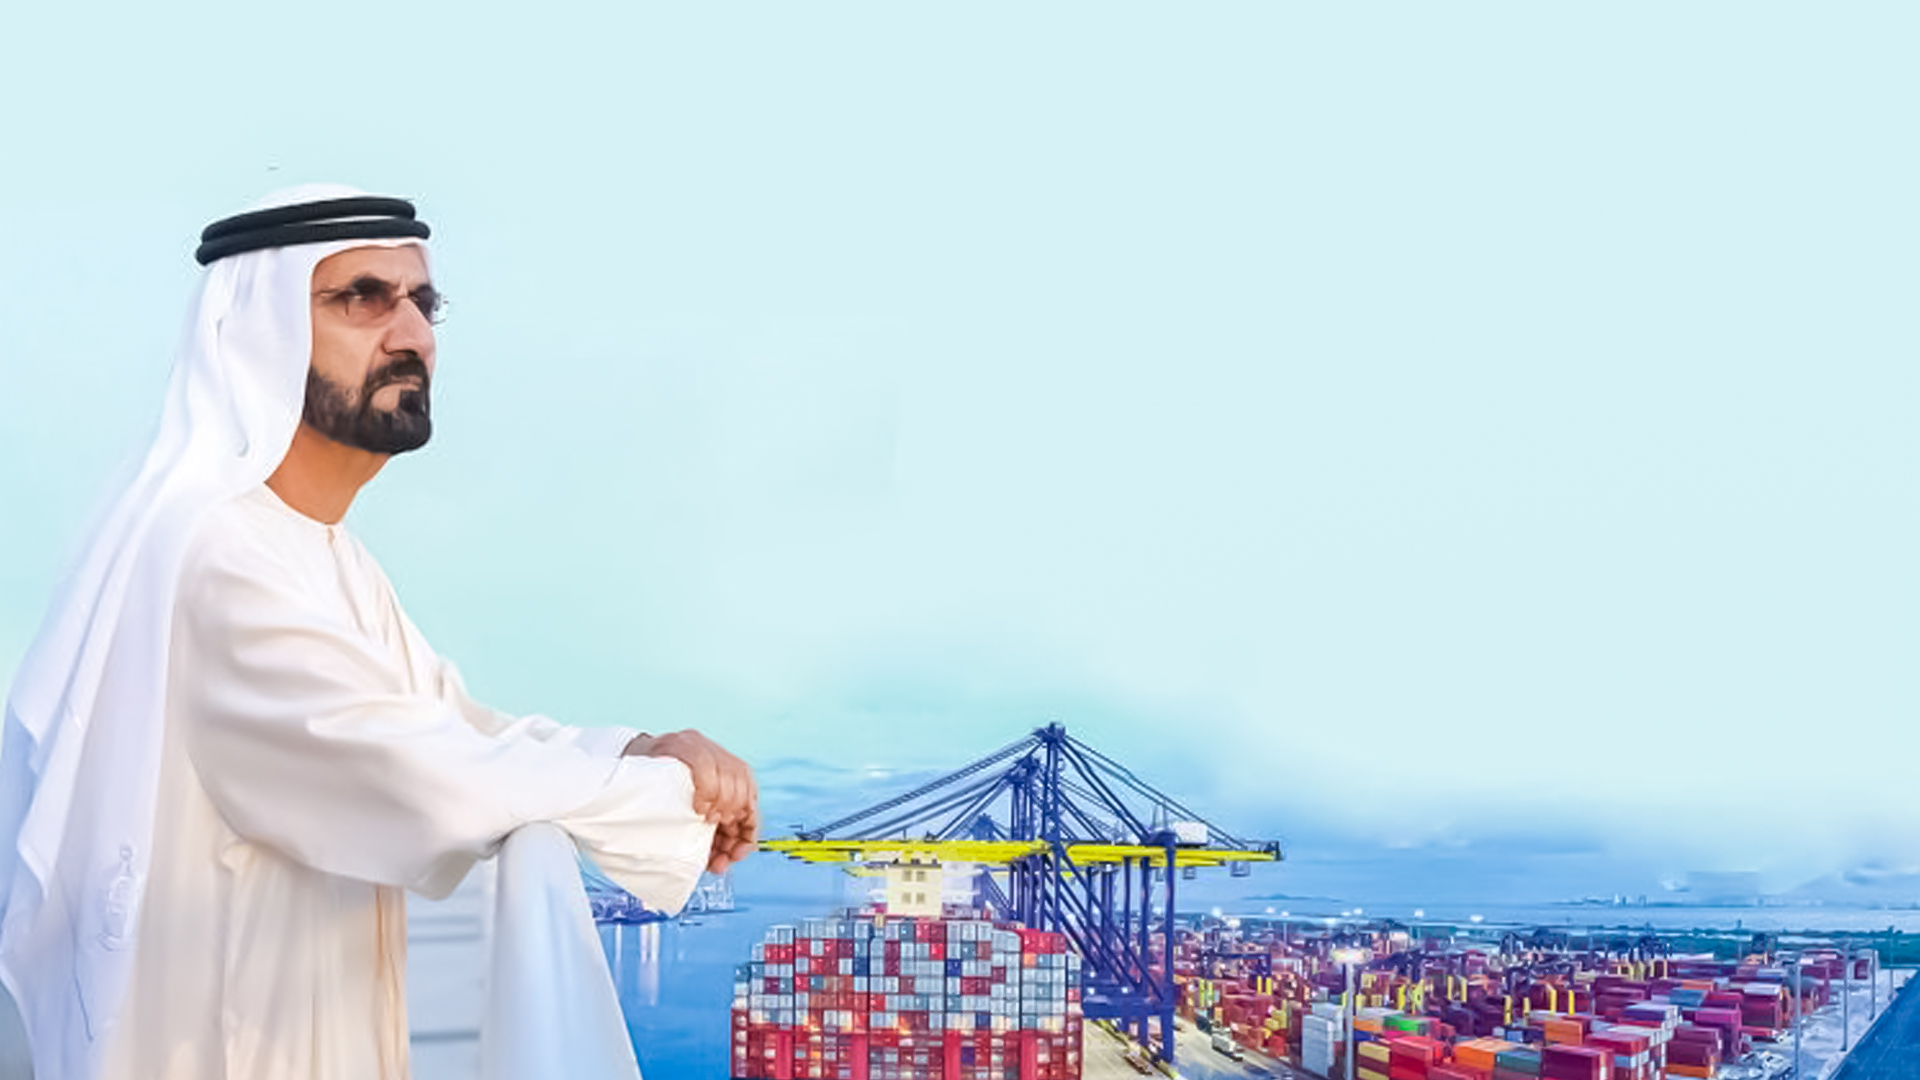 GDP in the UAE has surpassed expectations - Sheikh Mohammed